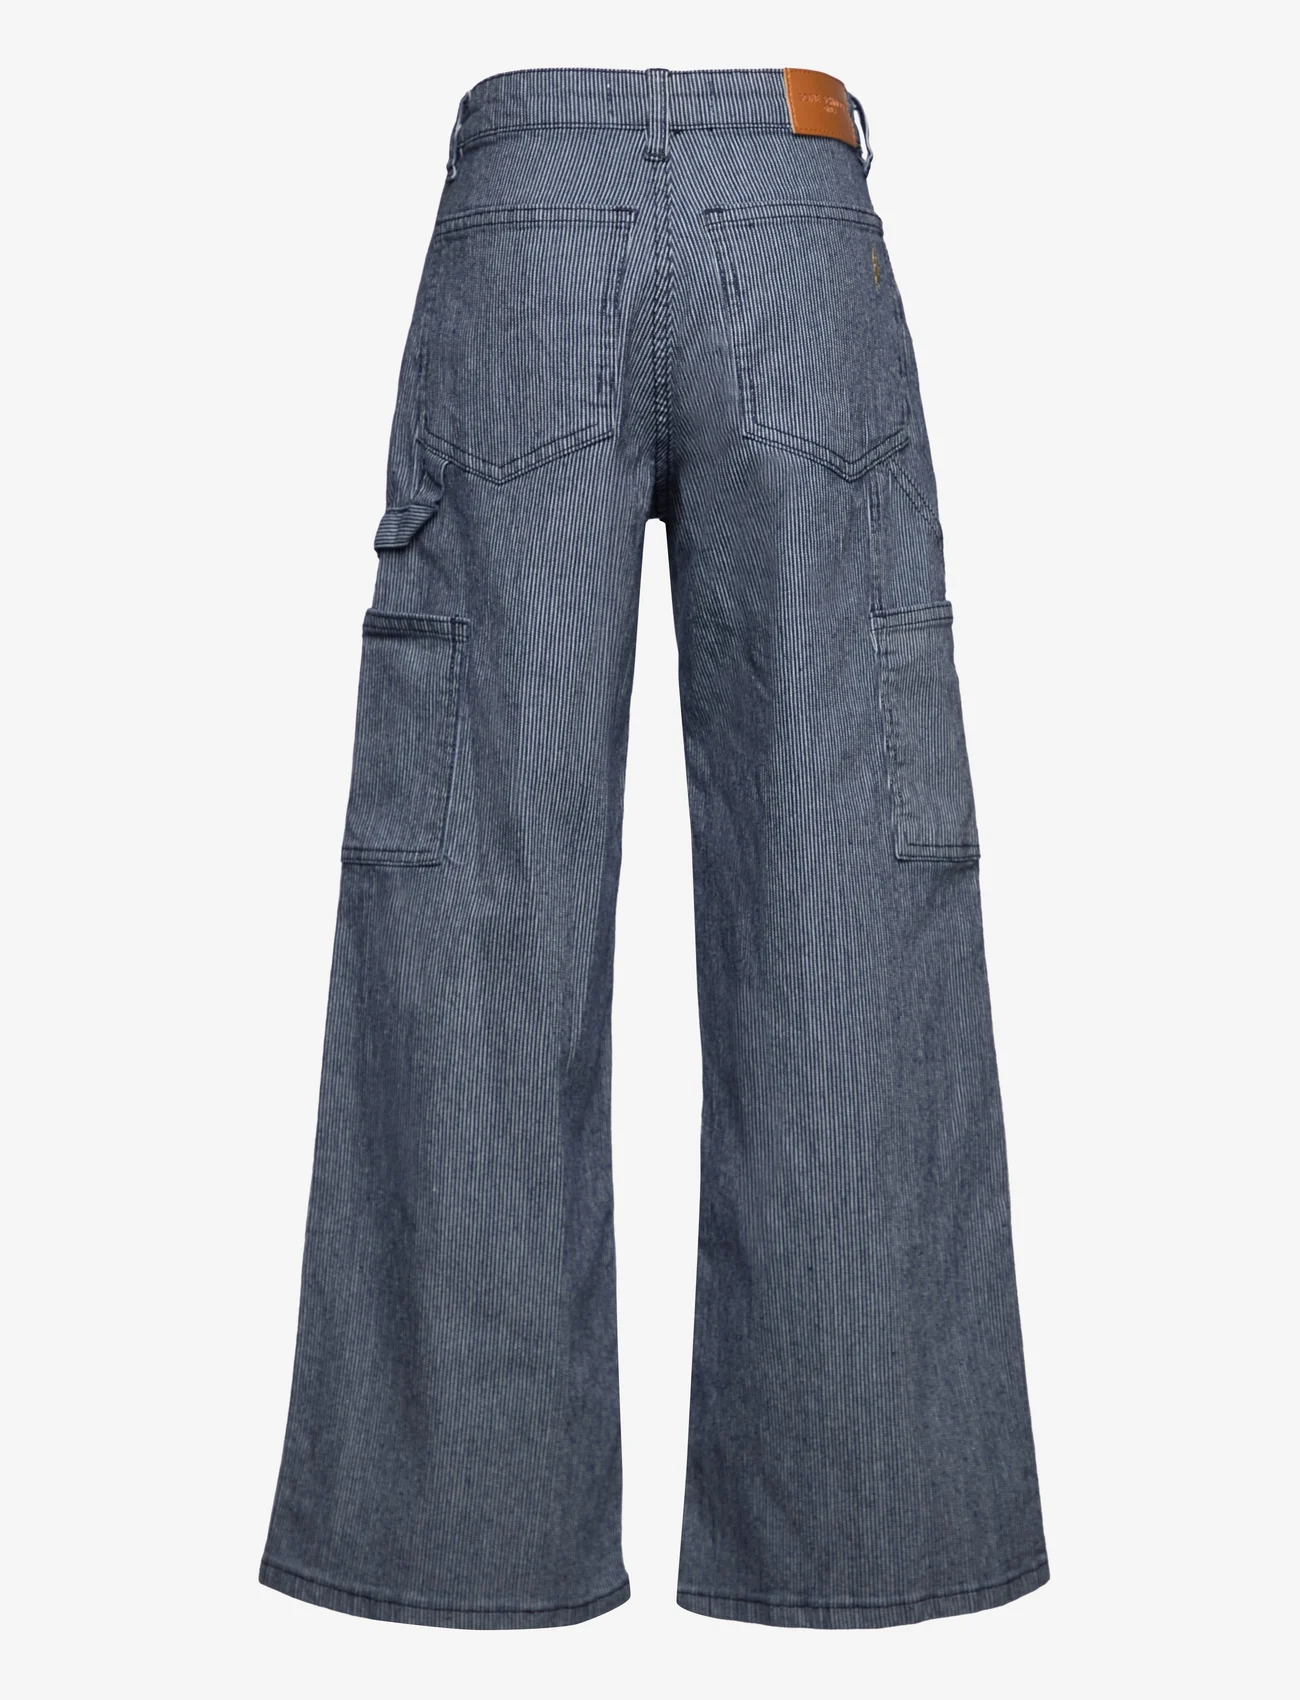 Sofie Schnoor Young - Pants - brede jeans - blue - 1